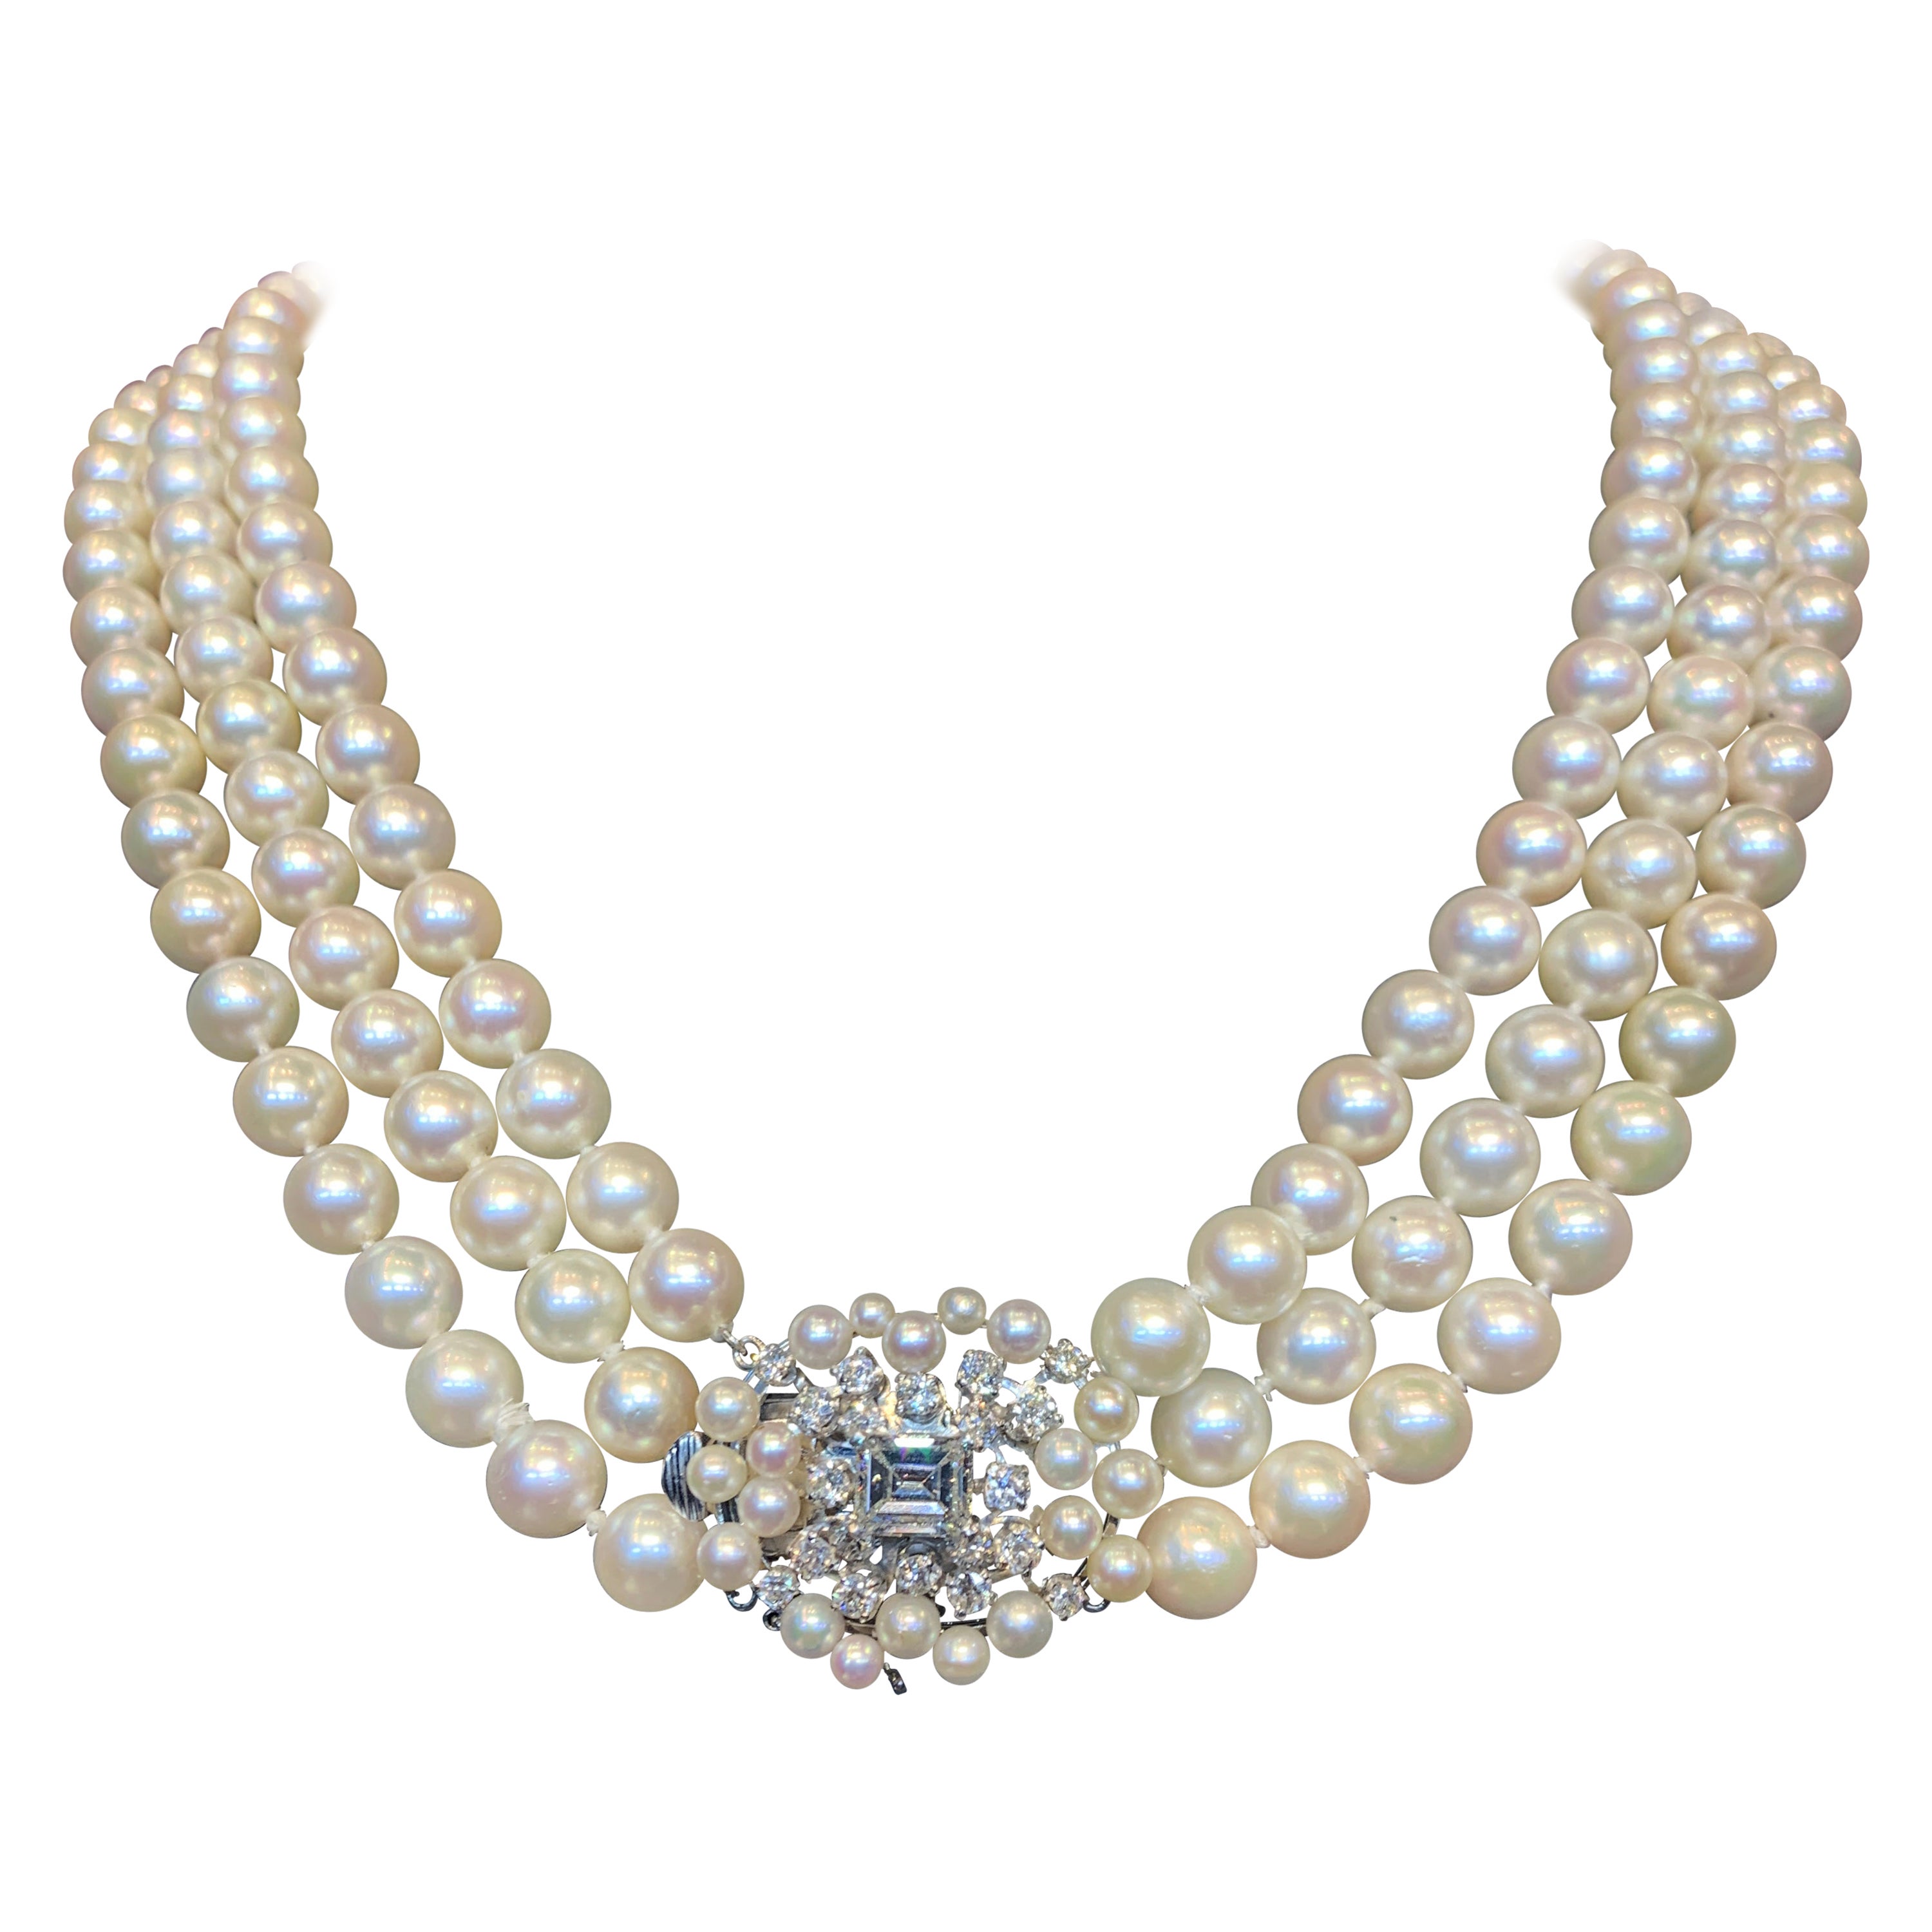 Three Strand Pearl And Diamond Necklace For Sale At 1stdibs